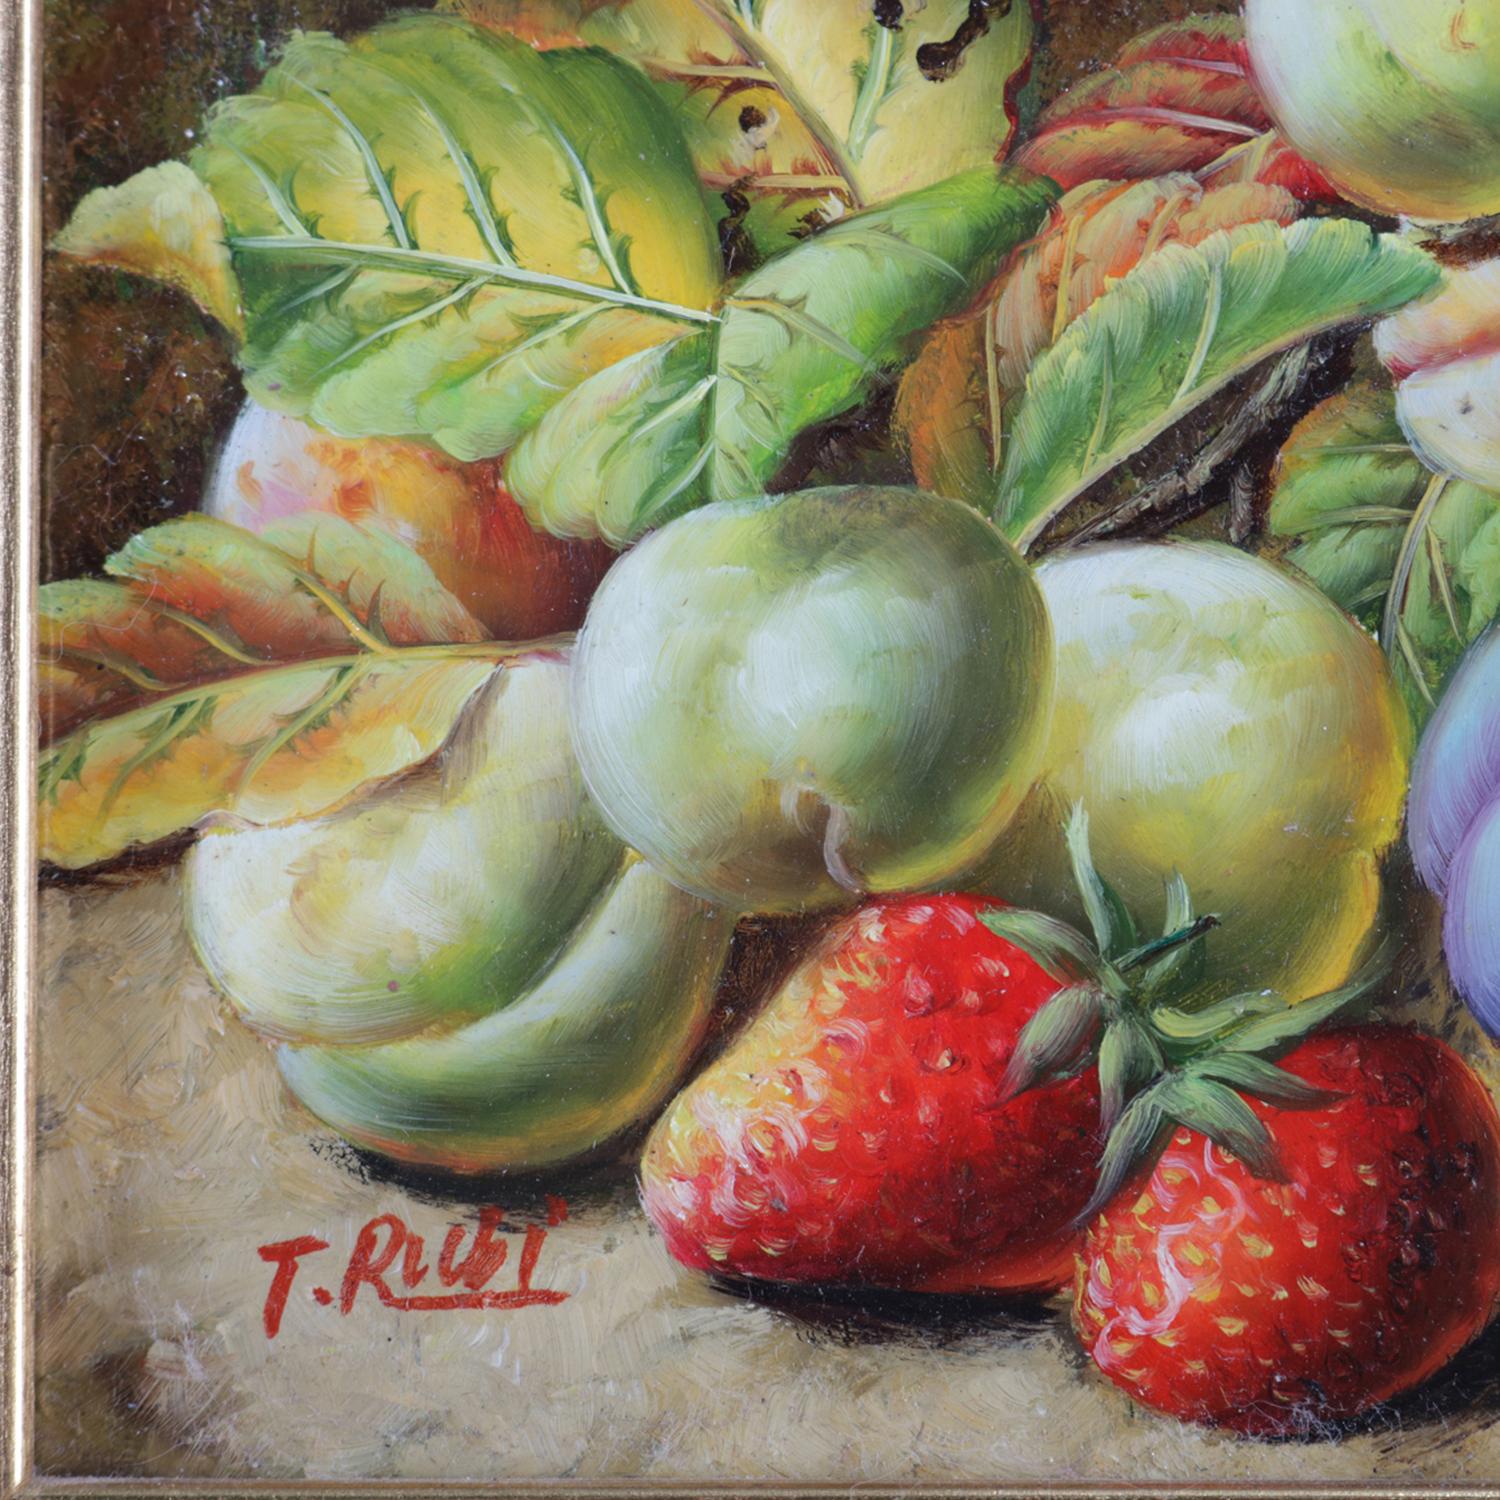 Contemporary oil on board still life painting depicts fruit and leaf grouping, signed lower left P. Rui, seated in giltwood frame, 20th century

Measures: Frame 11.75